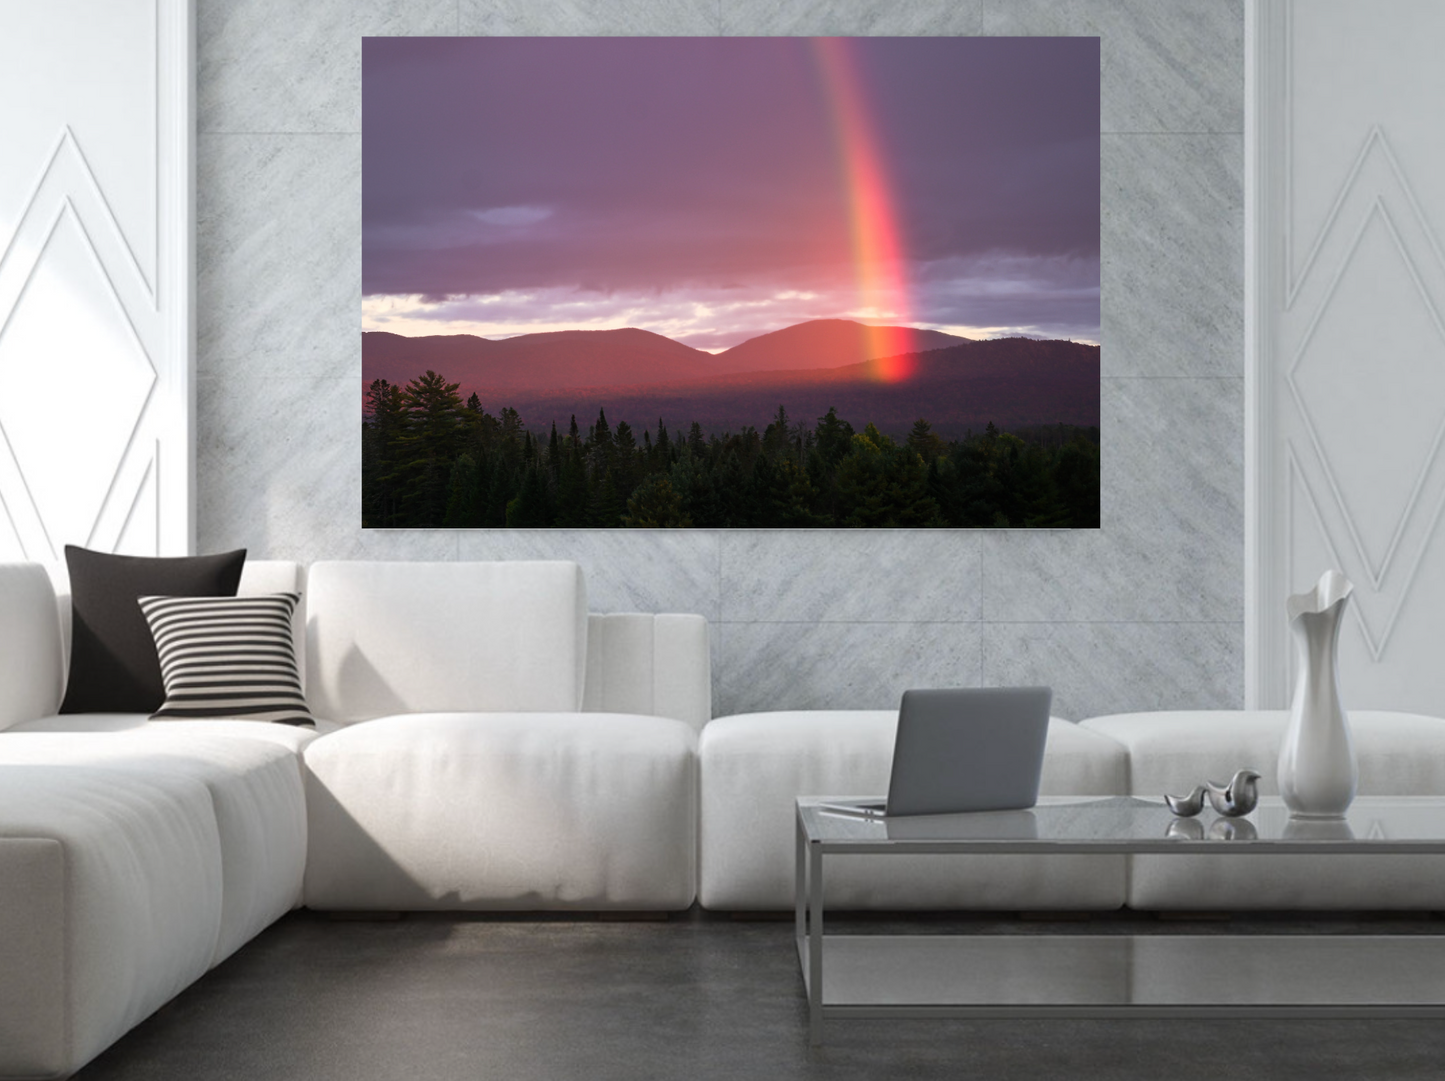 print of a rainbow and mountains